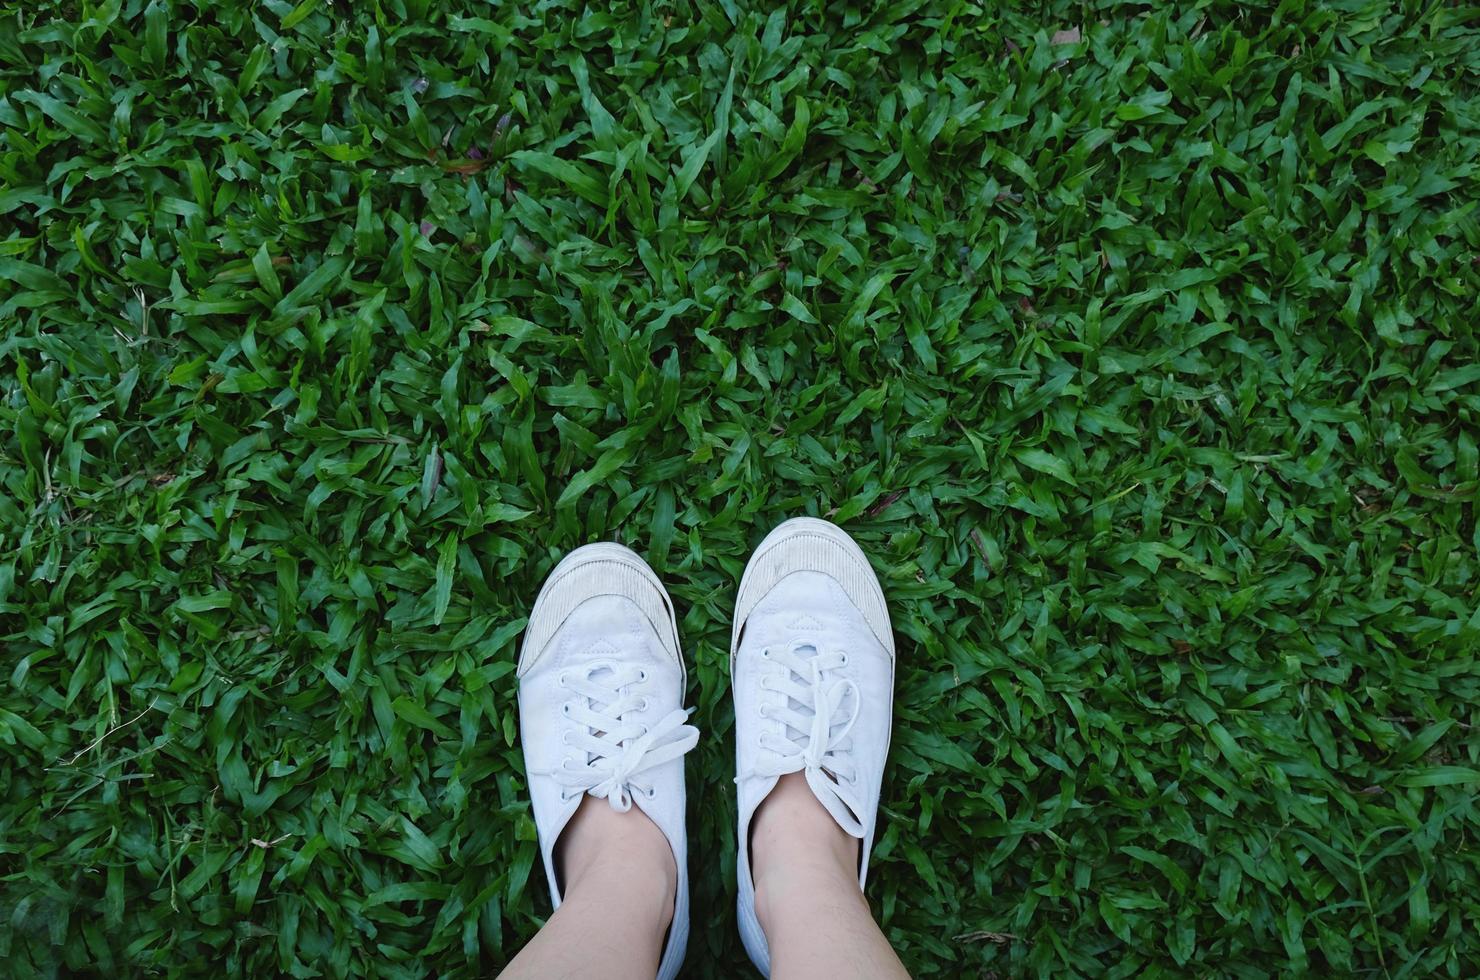 Selfie of feet in sneakers shoes on green grass background with copy space, spring and summer concept photo